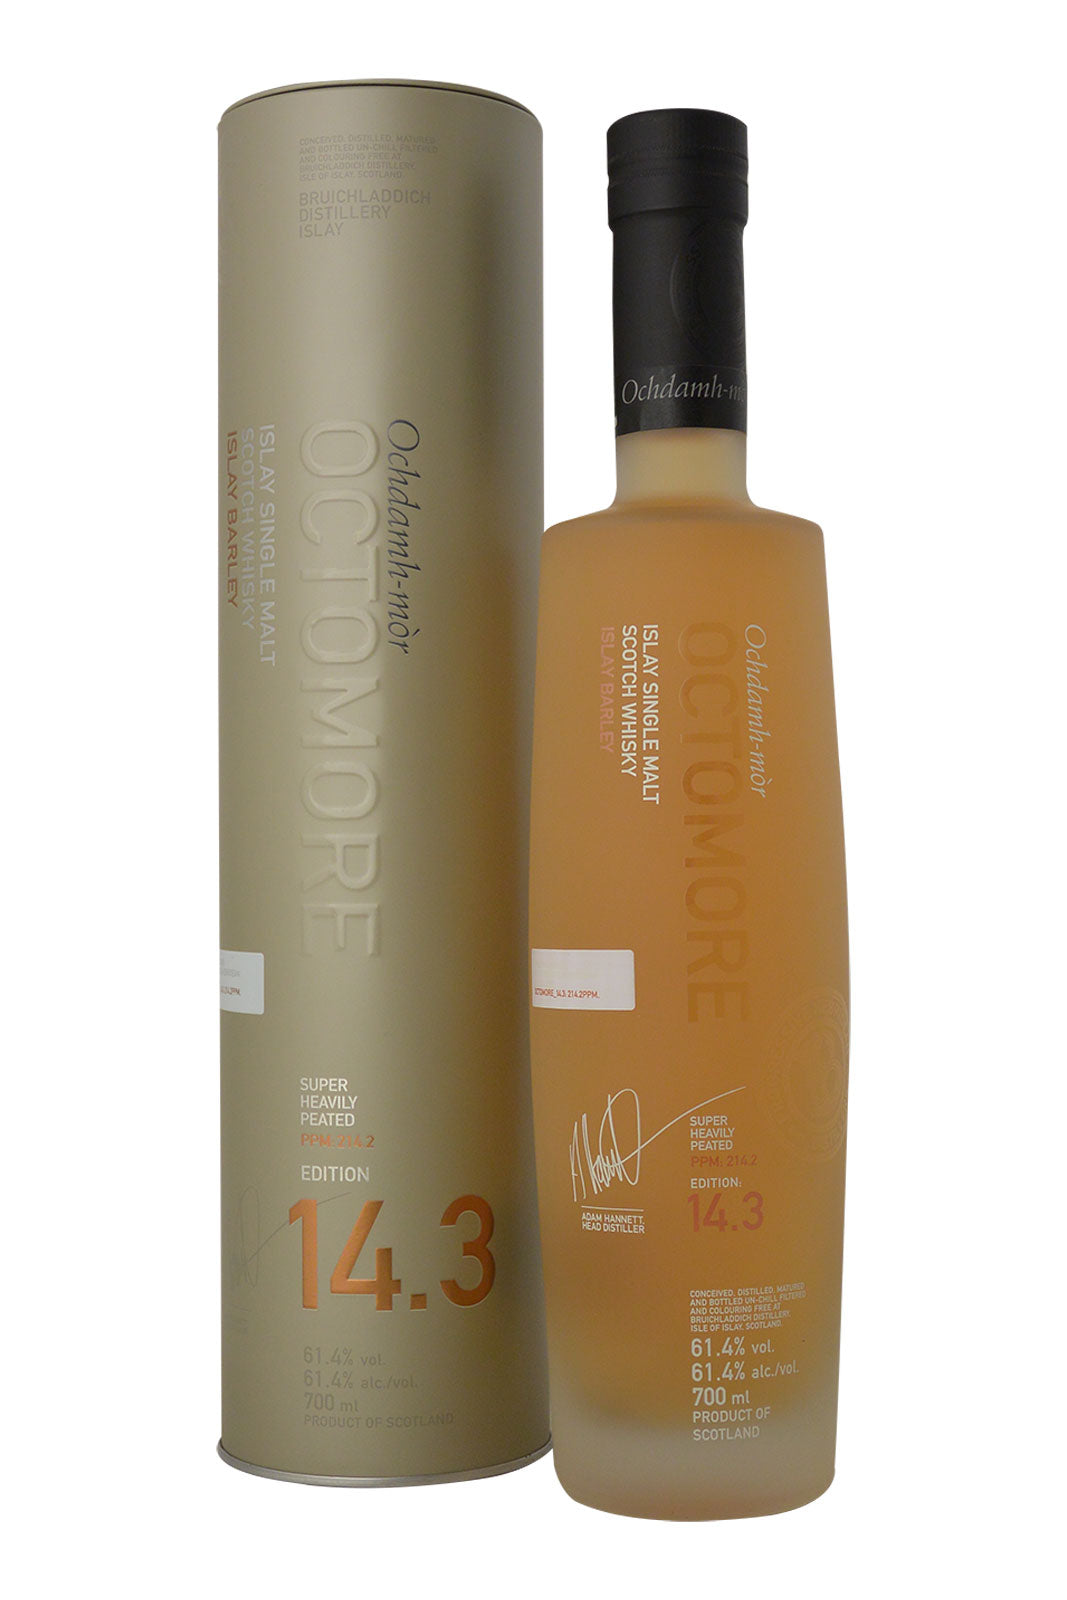 Octomore Edition 14.3 5 Year Old Islay Barley - 214.2 PPM